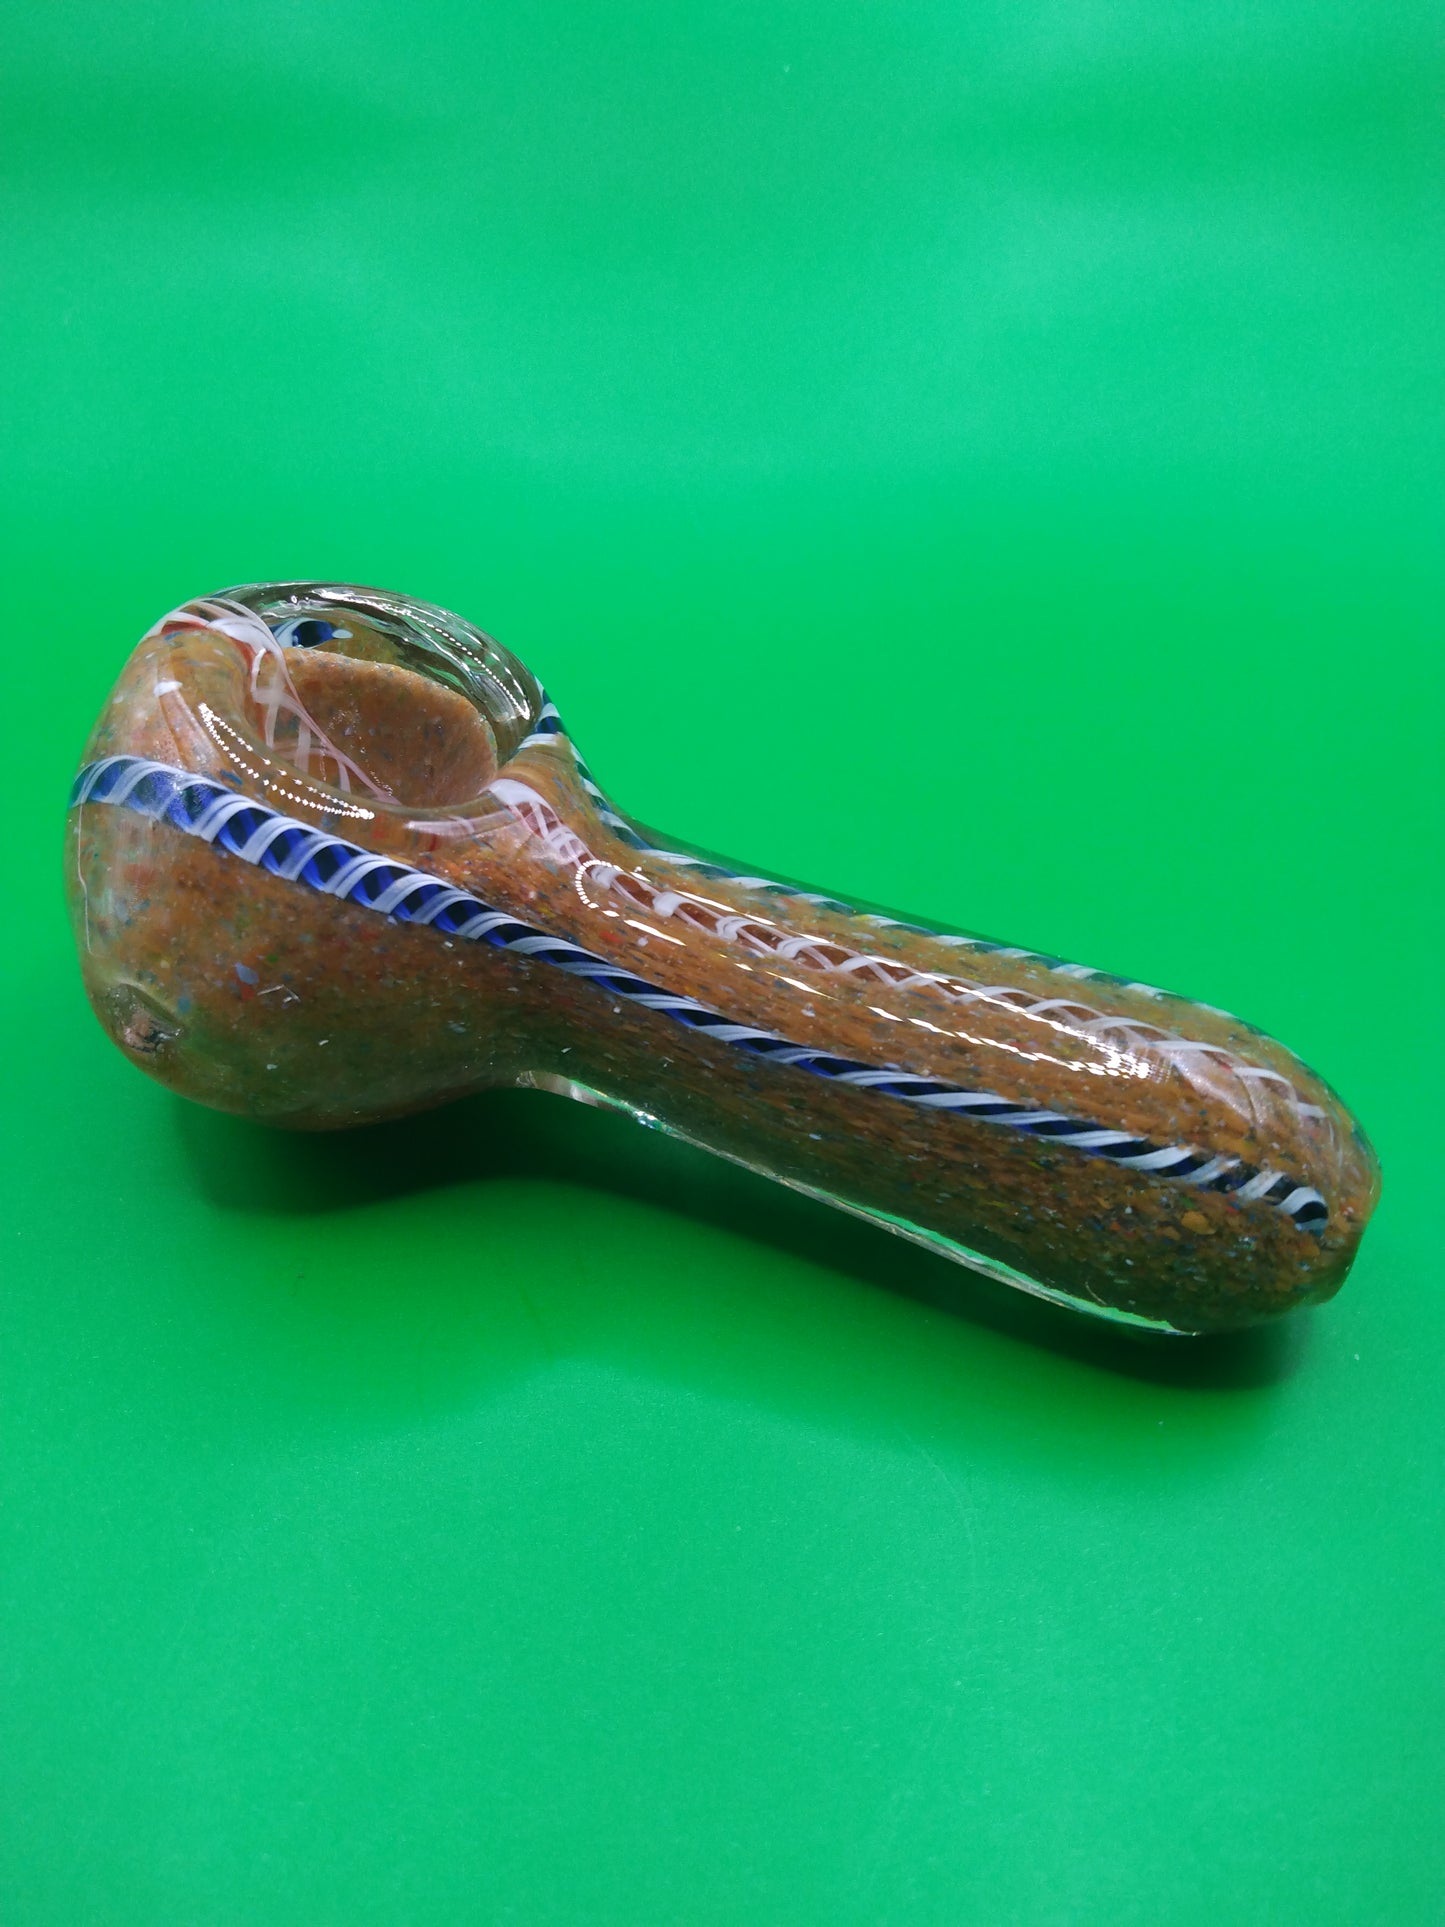 3.5" Brown & White/Blue Striped Glass Hand Pipe (Spoon)